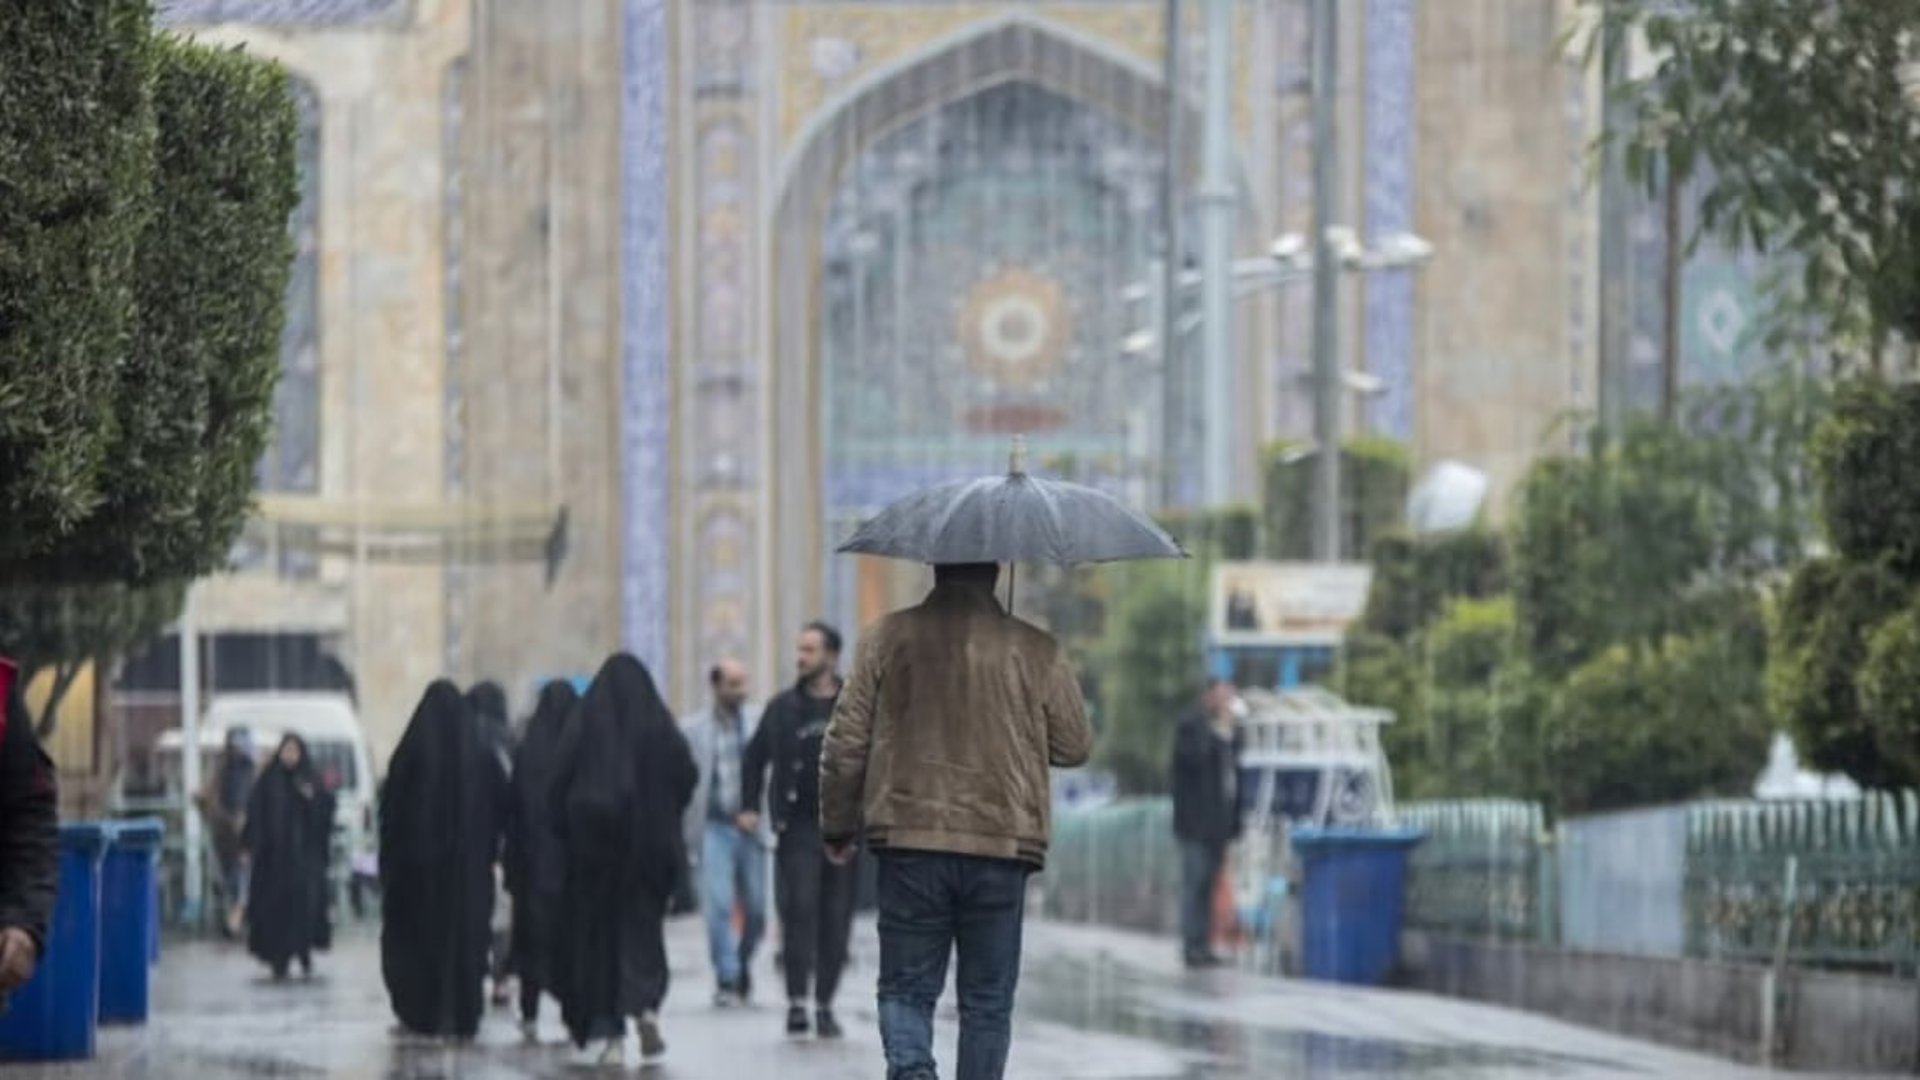 Karbala welcomes recent rainfall eyes potential rainwater harvesting to combat drought